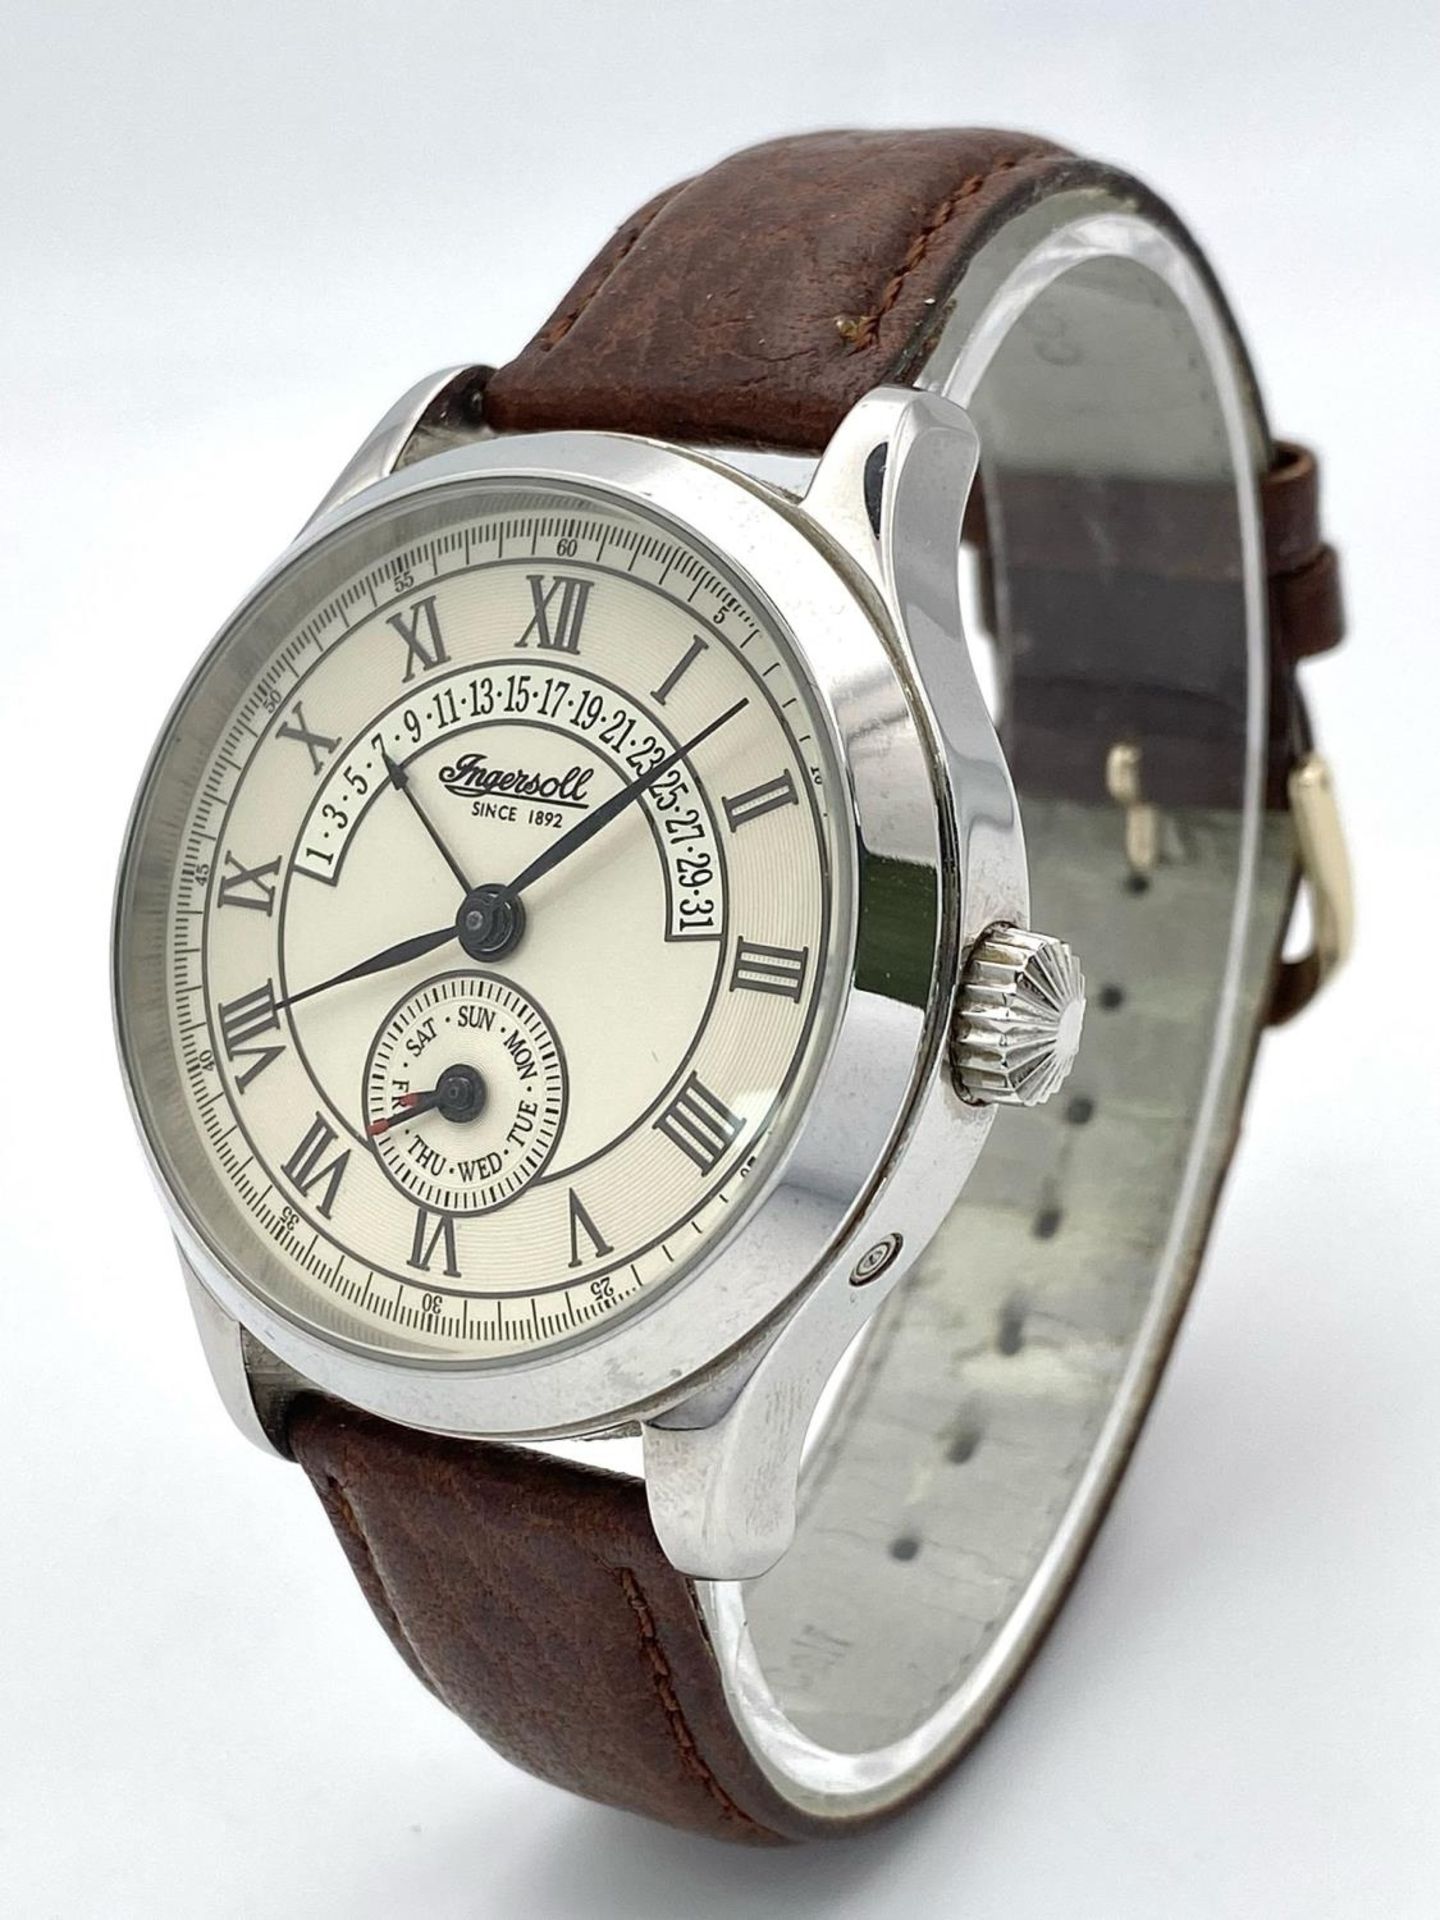 A Limited Edition (IN4800) Ingersoll Automatic Gents Watch. Brown leather strap. Stainless steel